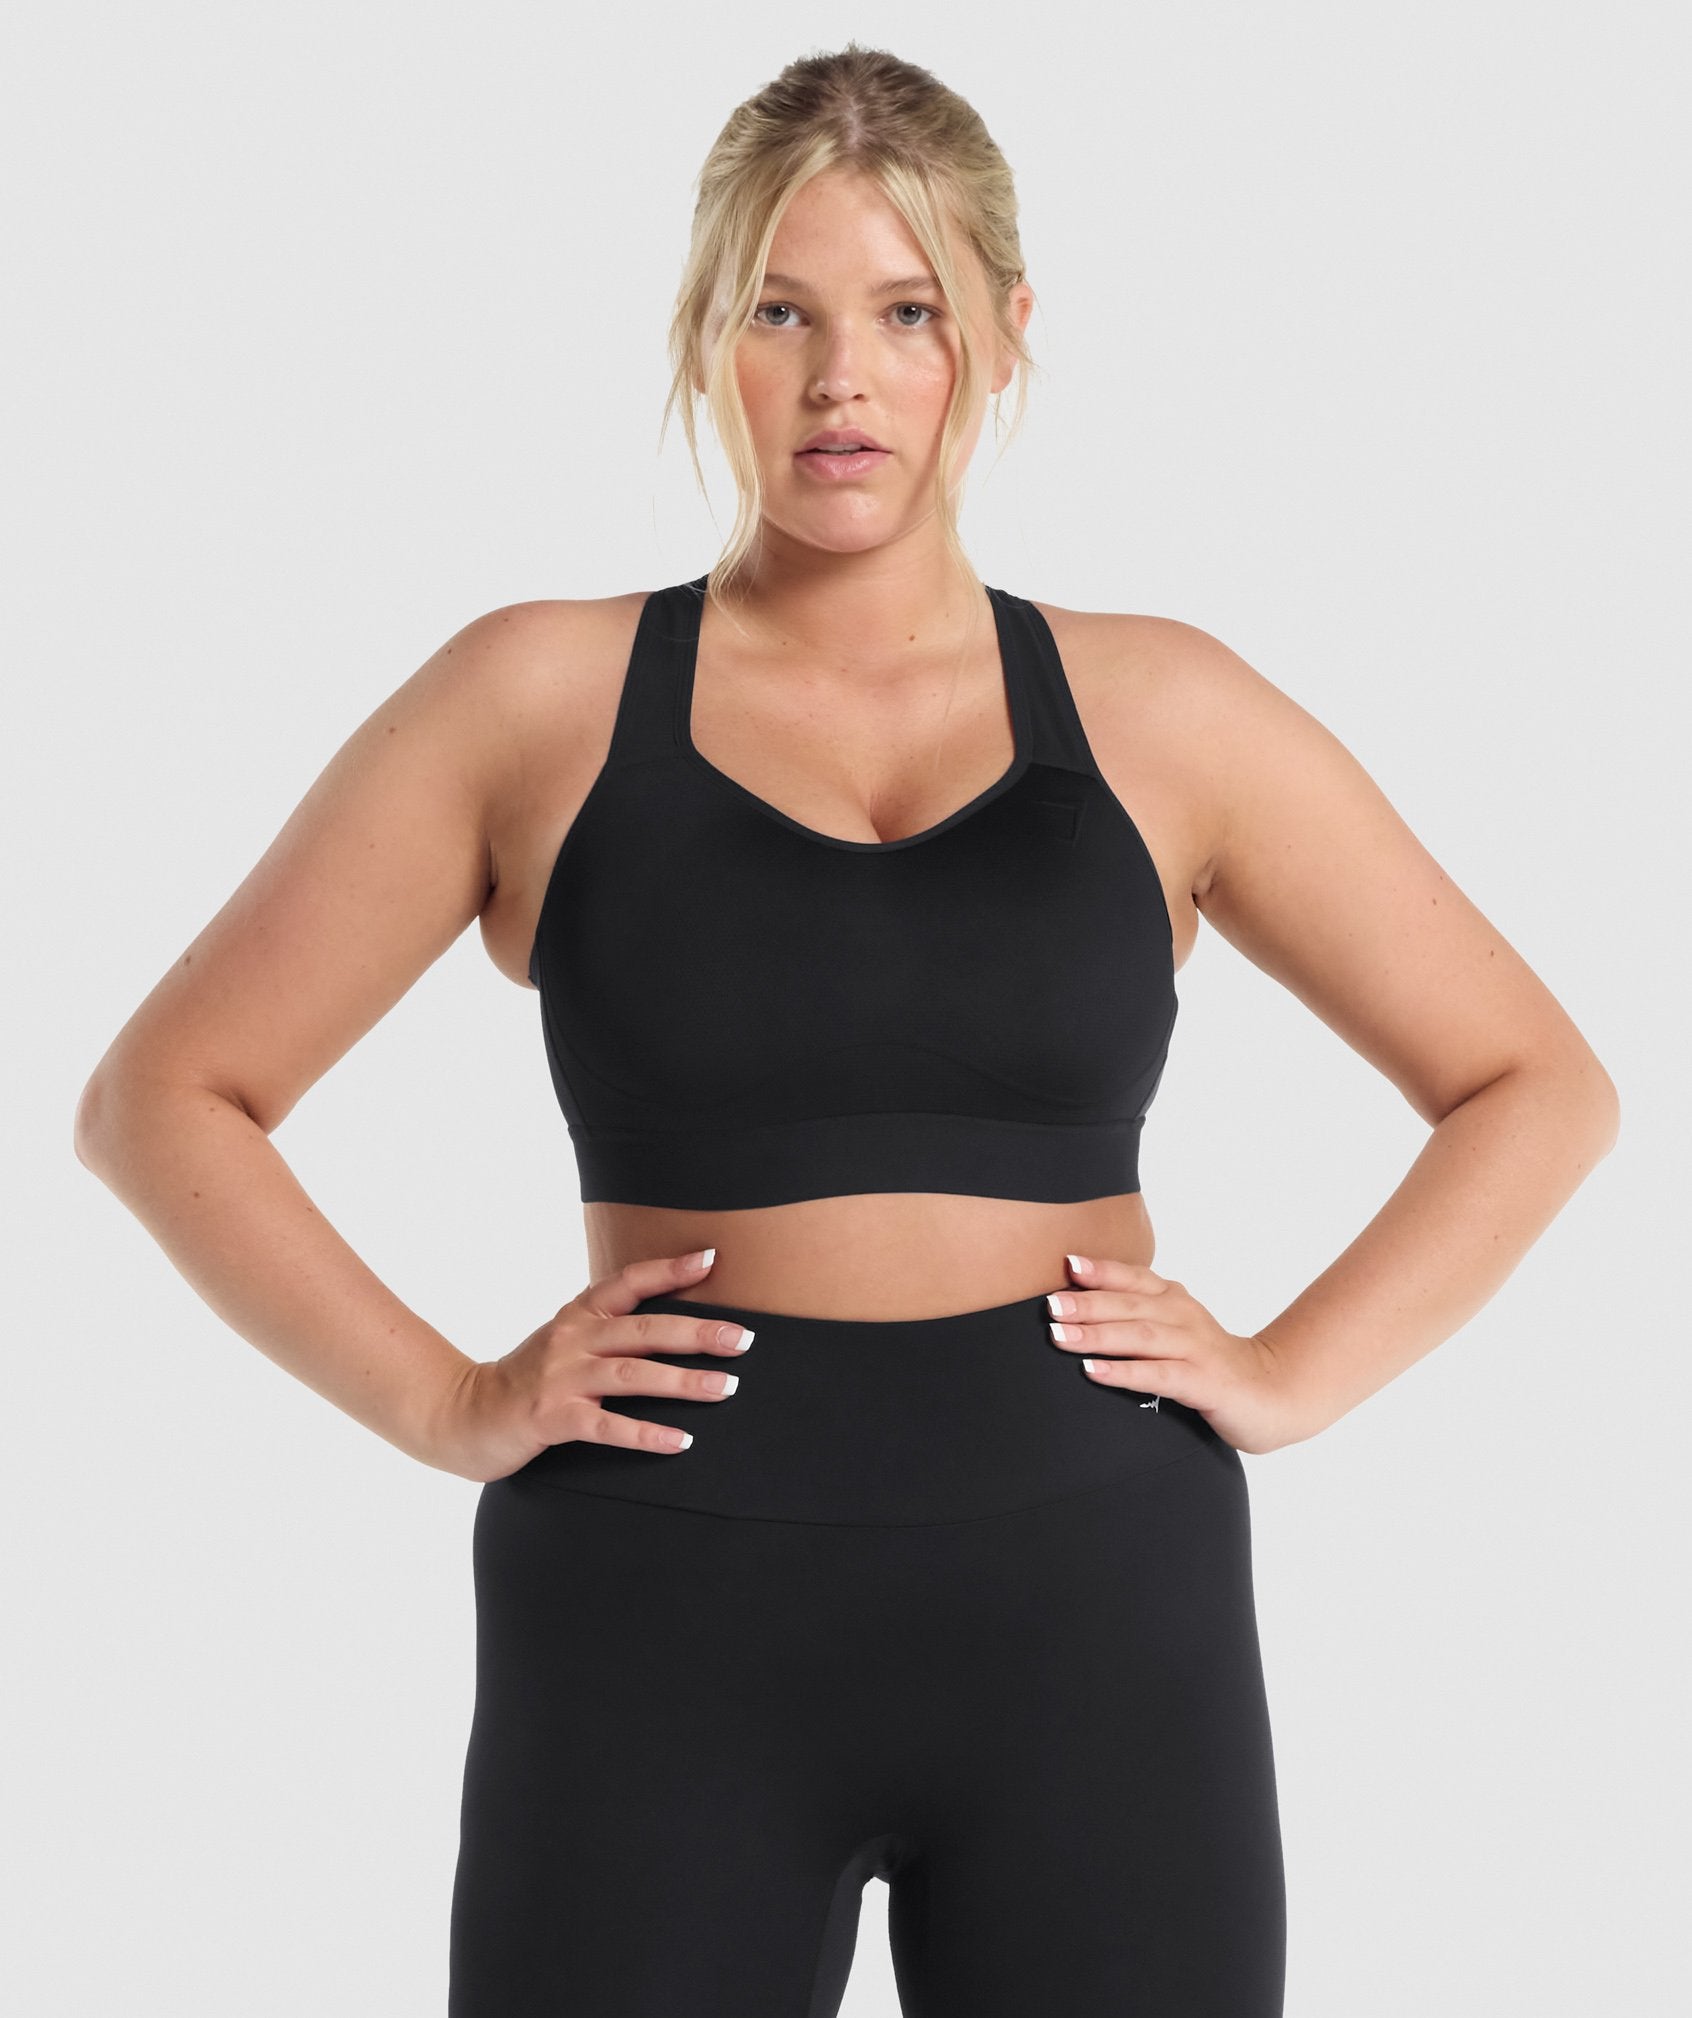 10 Of The Best DD Cup Size Sports Bras Out There - The B-Word Blog